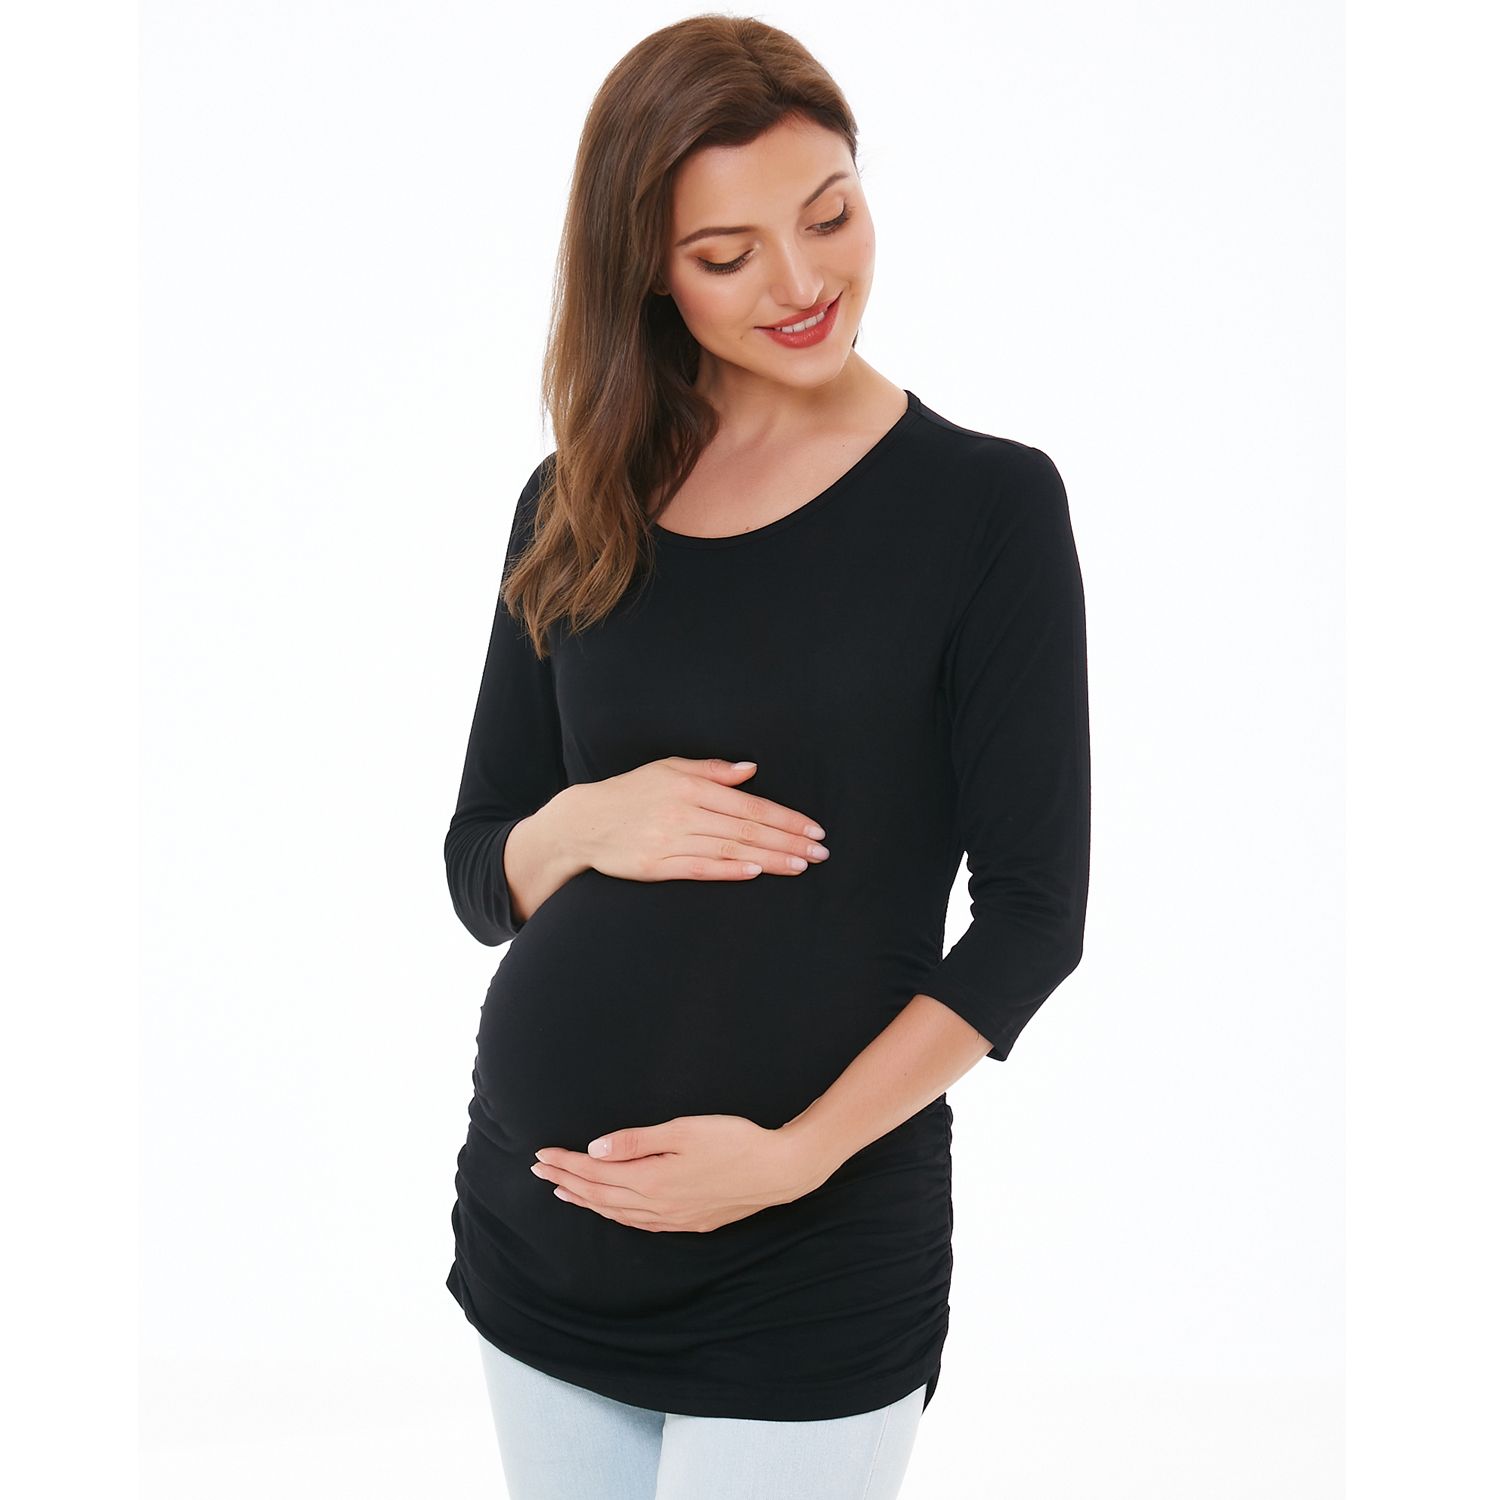 Smallshow Women's V-Neck Maternity Shirt Clothes Long Sleeve Ruched Pregnancy Top 